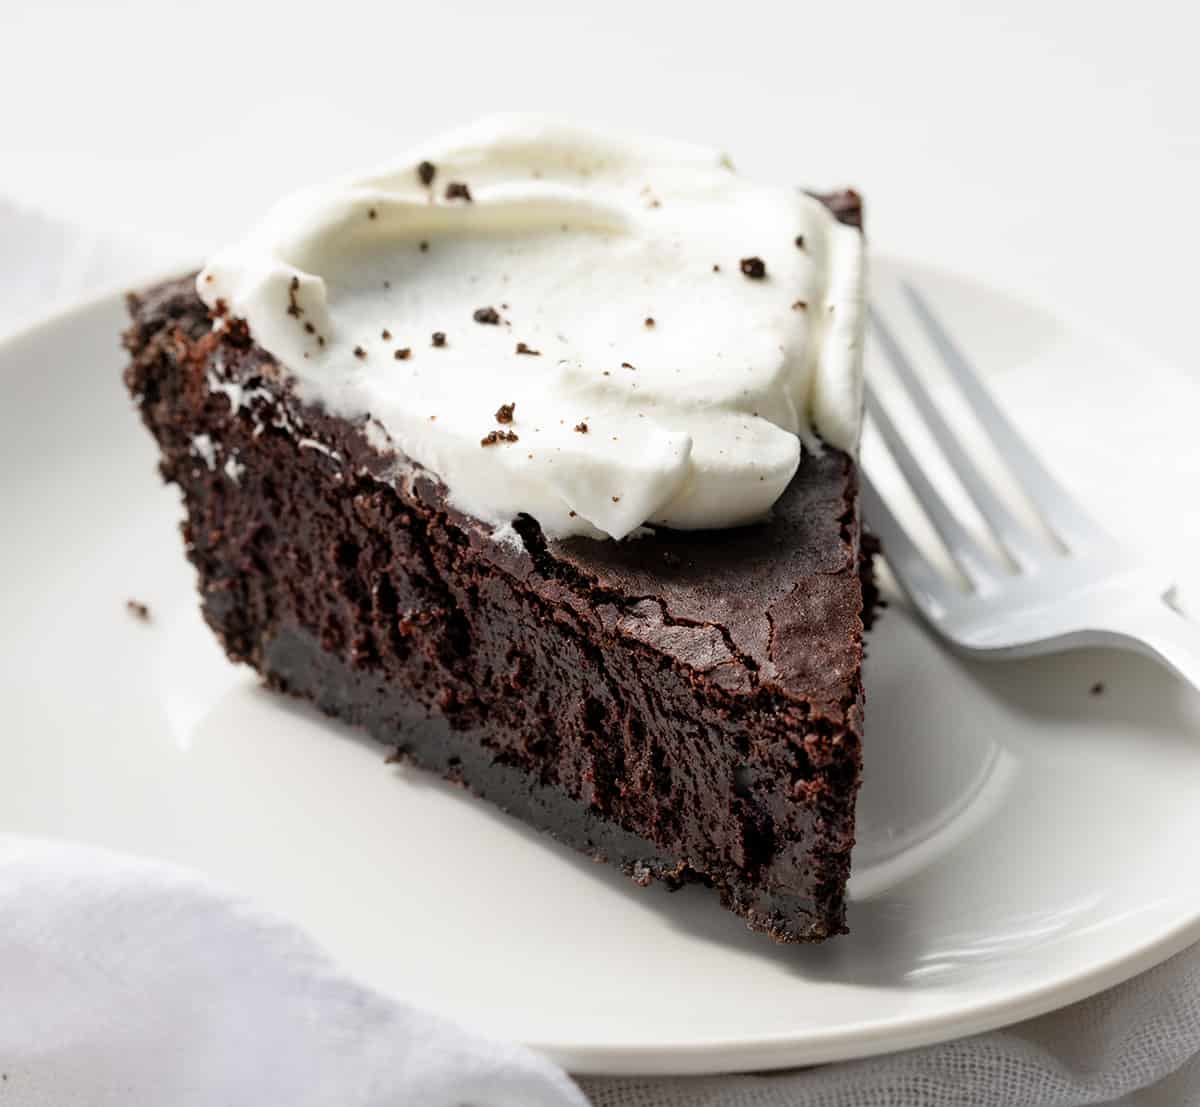 Piece of Brownie Pie on a White Plate with Whipped Cream.